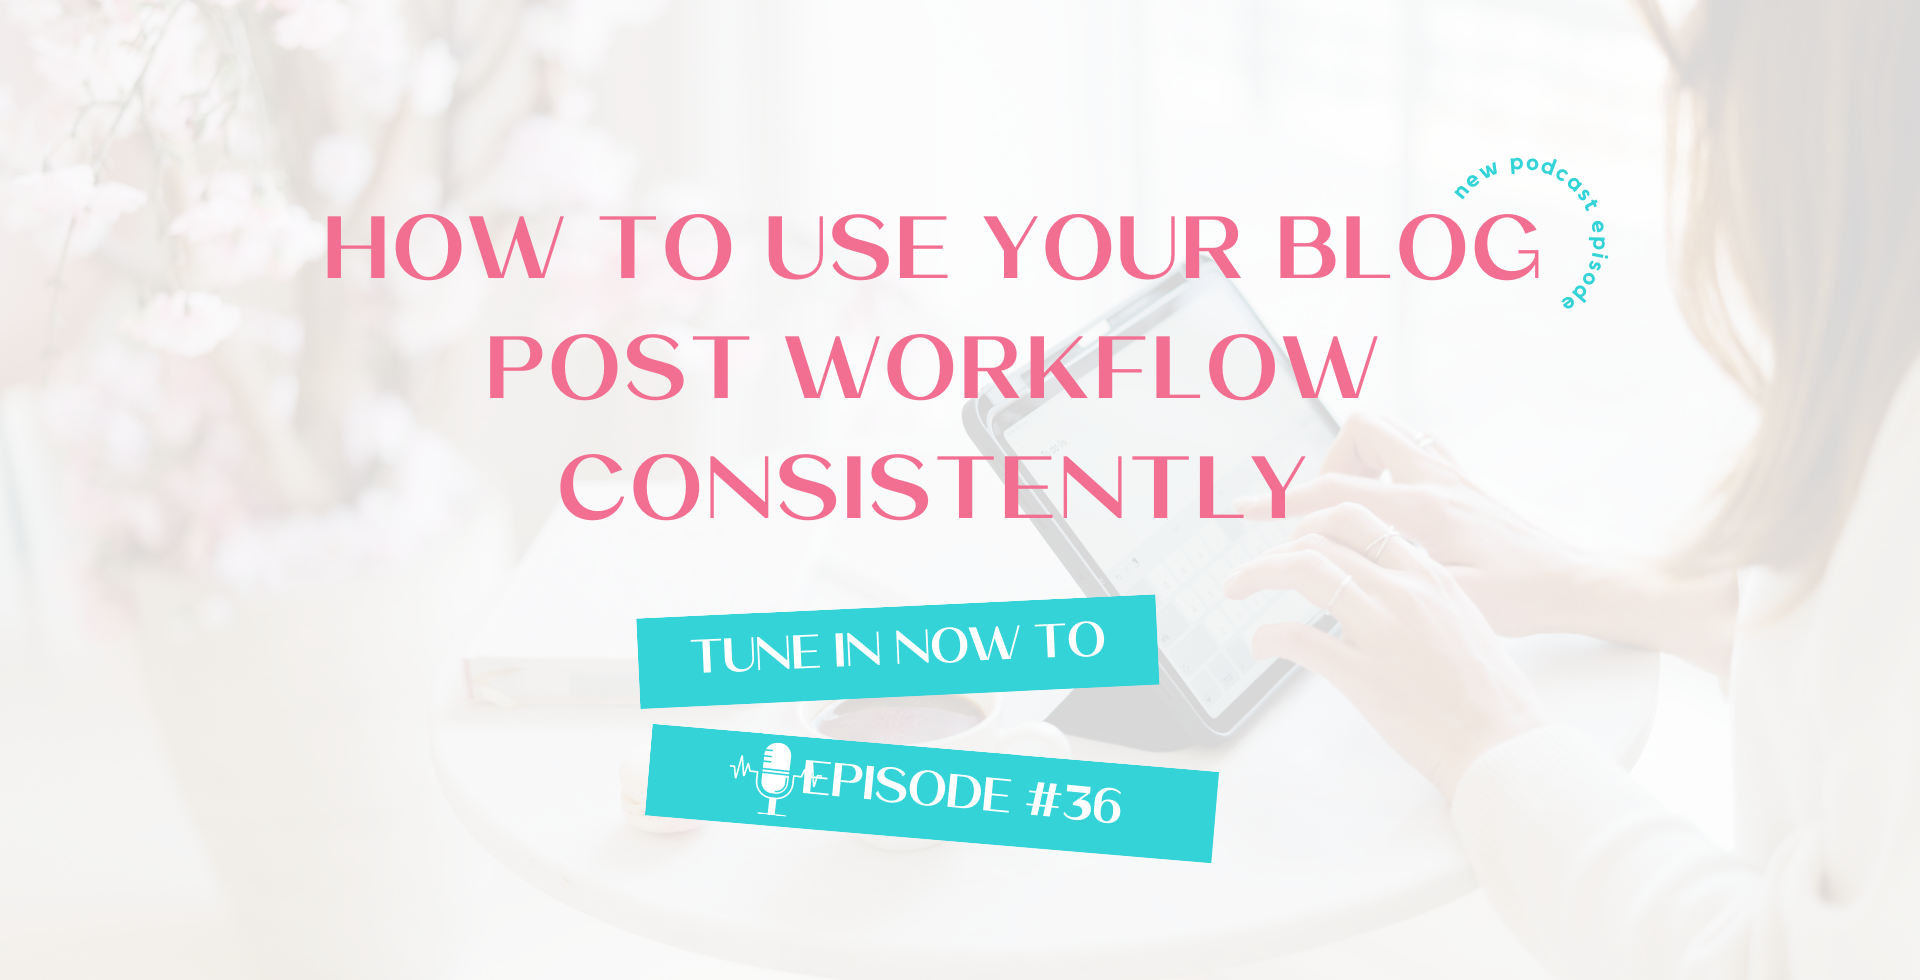 How to Use Your Blog Post Workflow Consistently featured banner